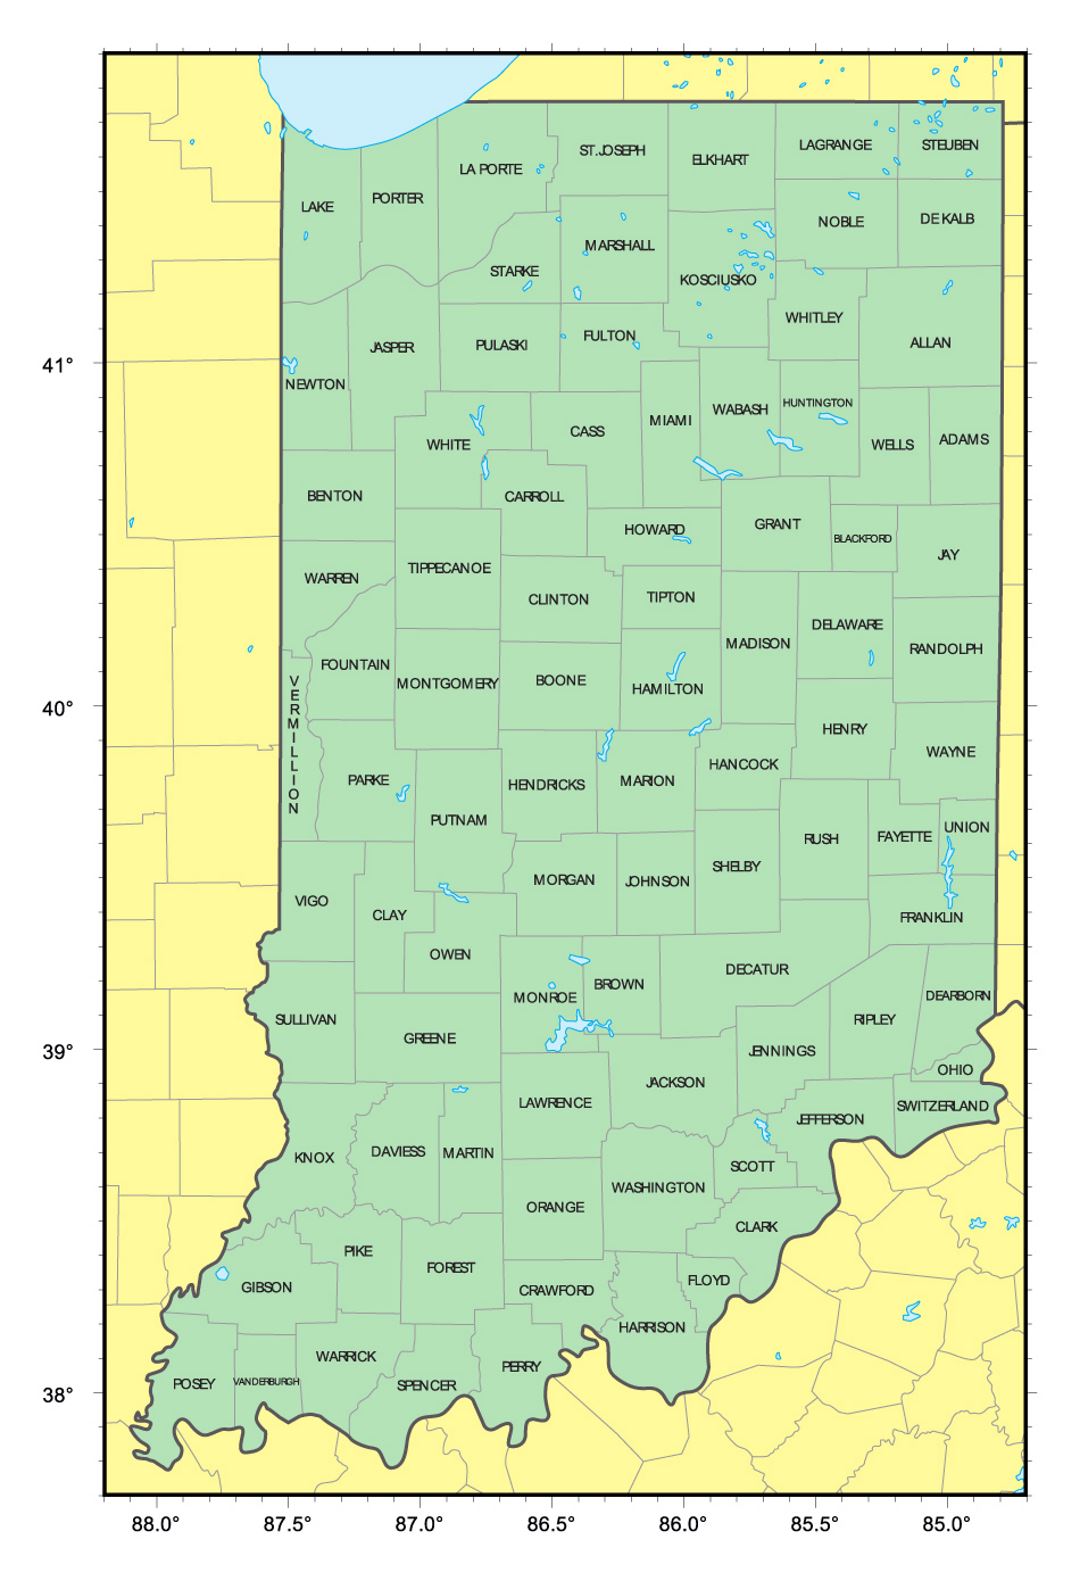 Detailed administrative map of Indiana state